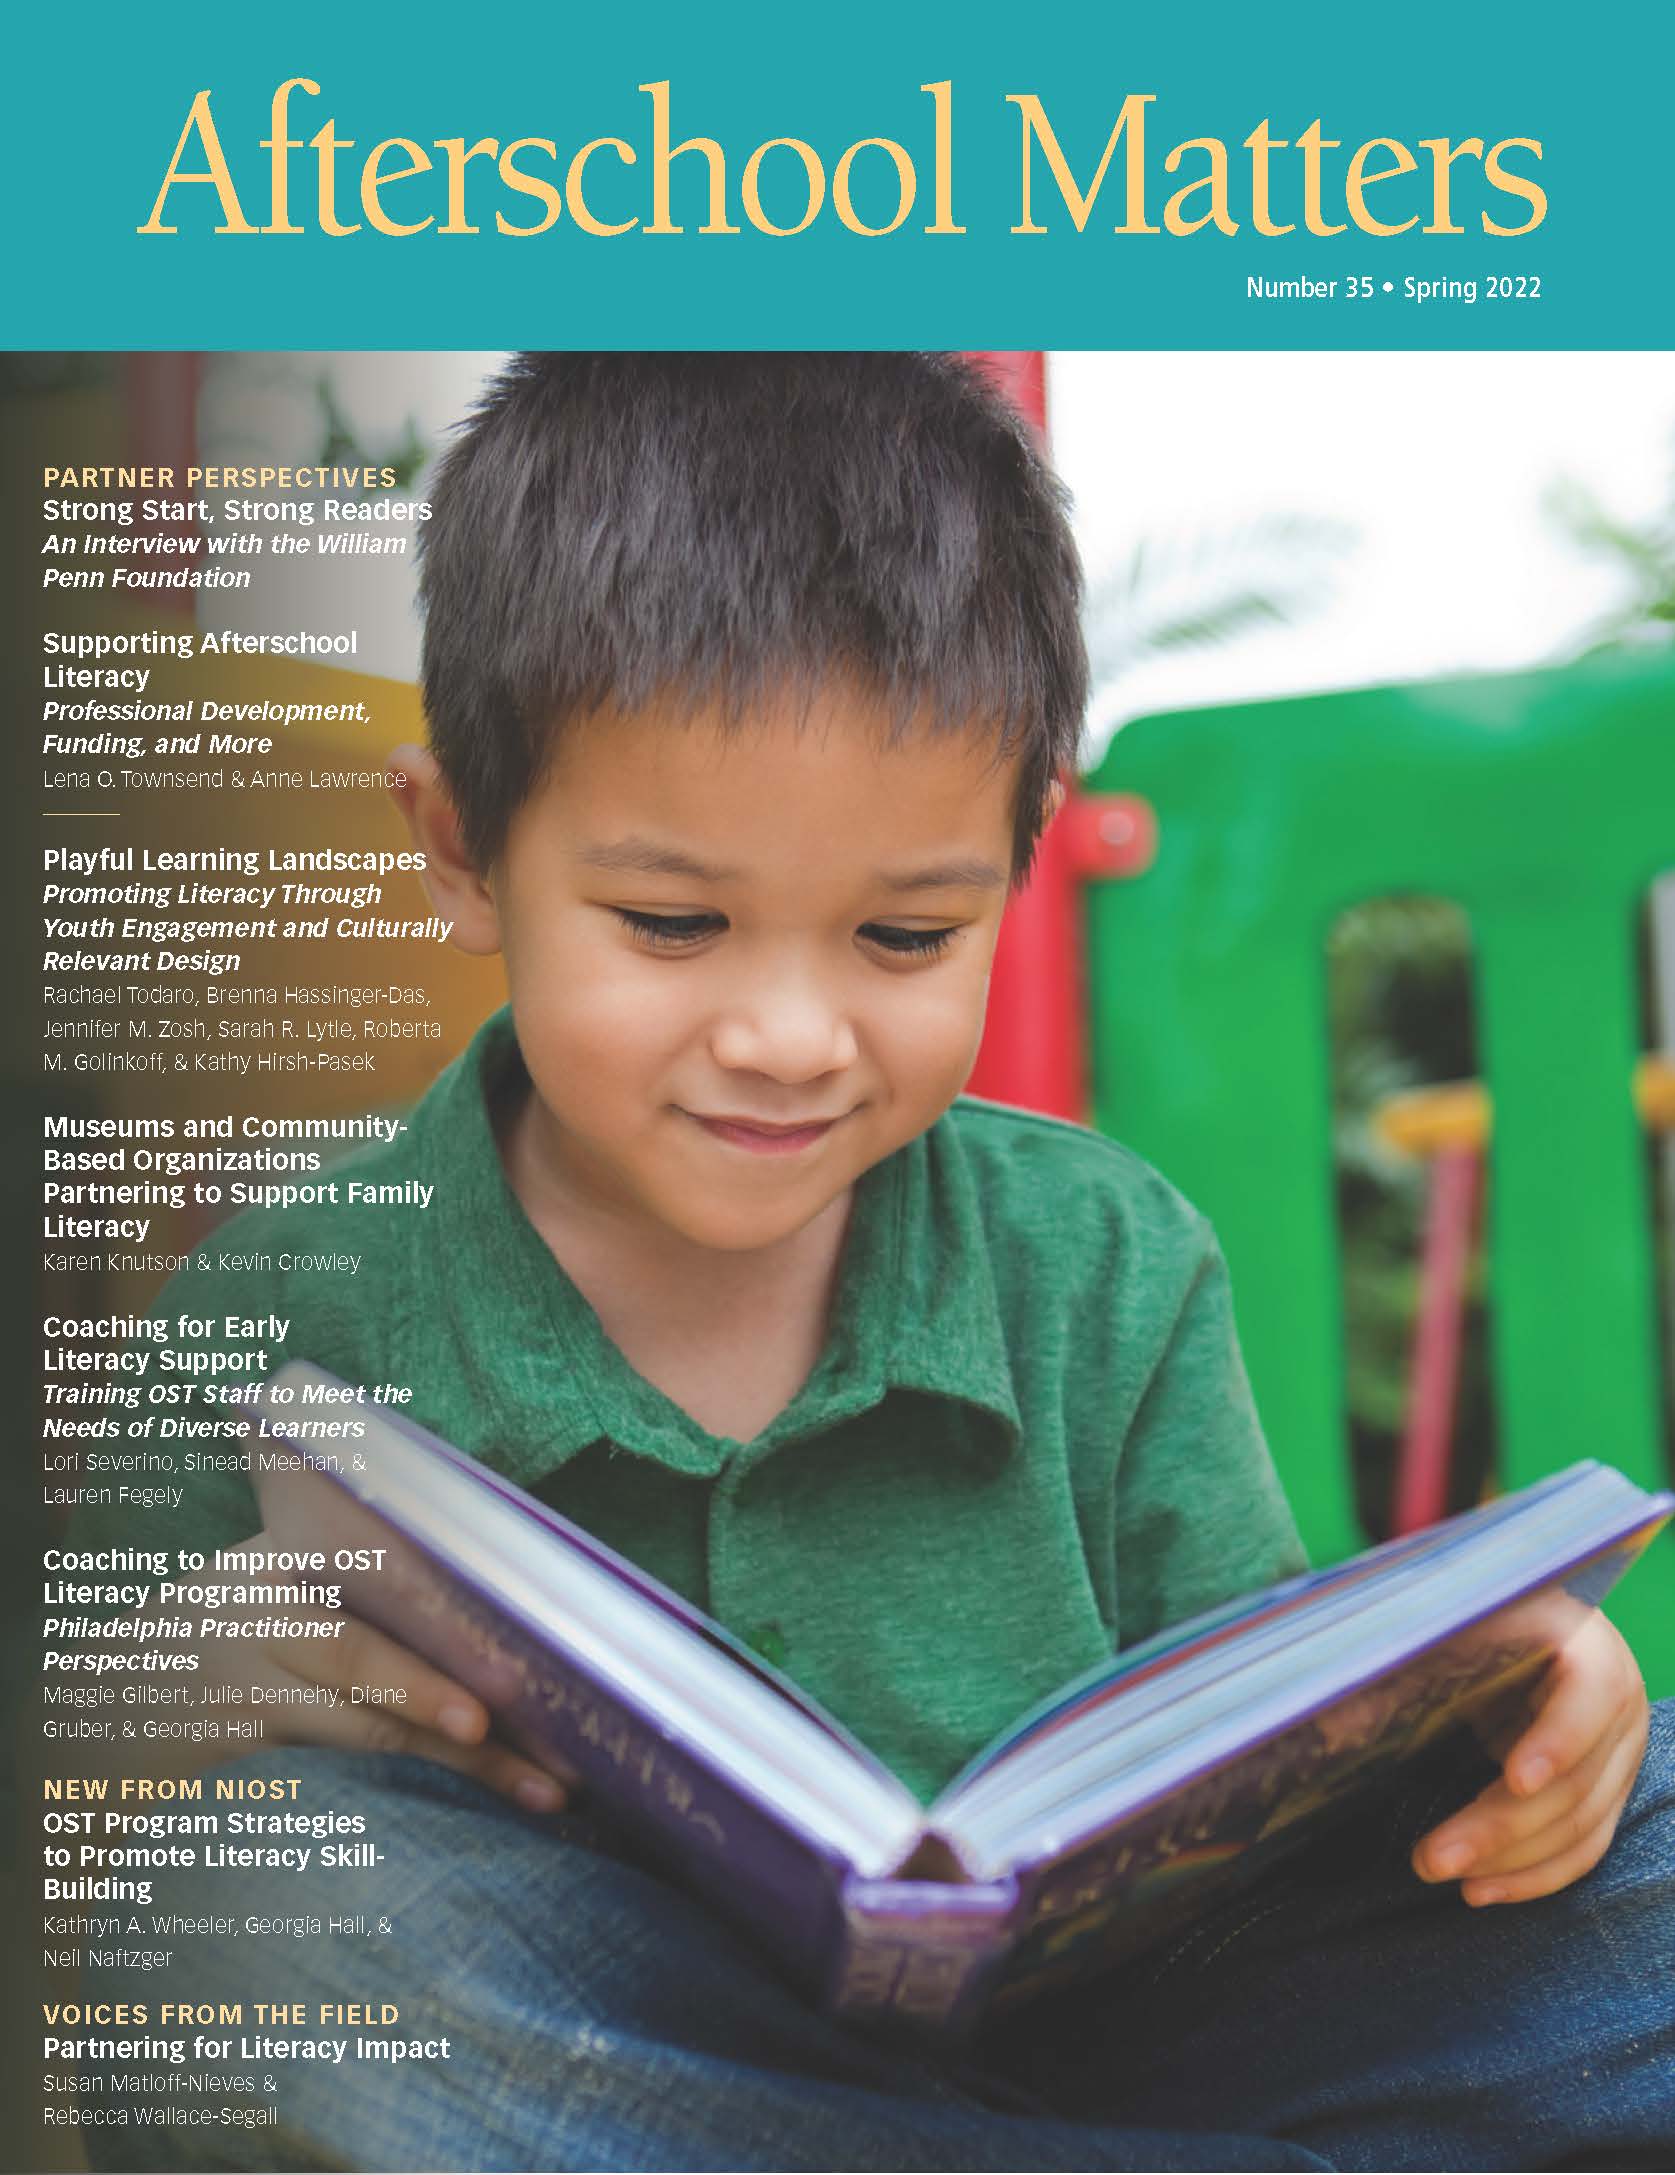 cover of the magazine shows a boy reading a book